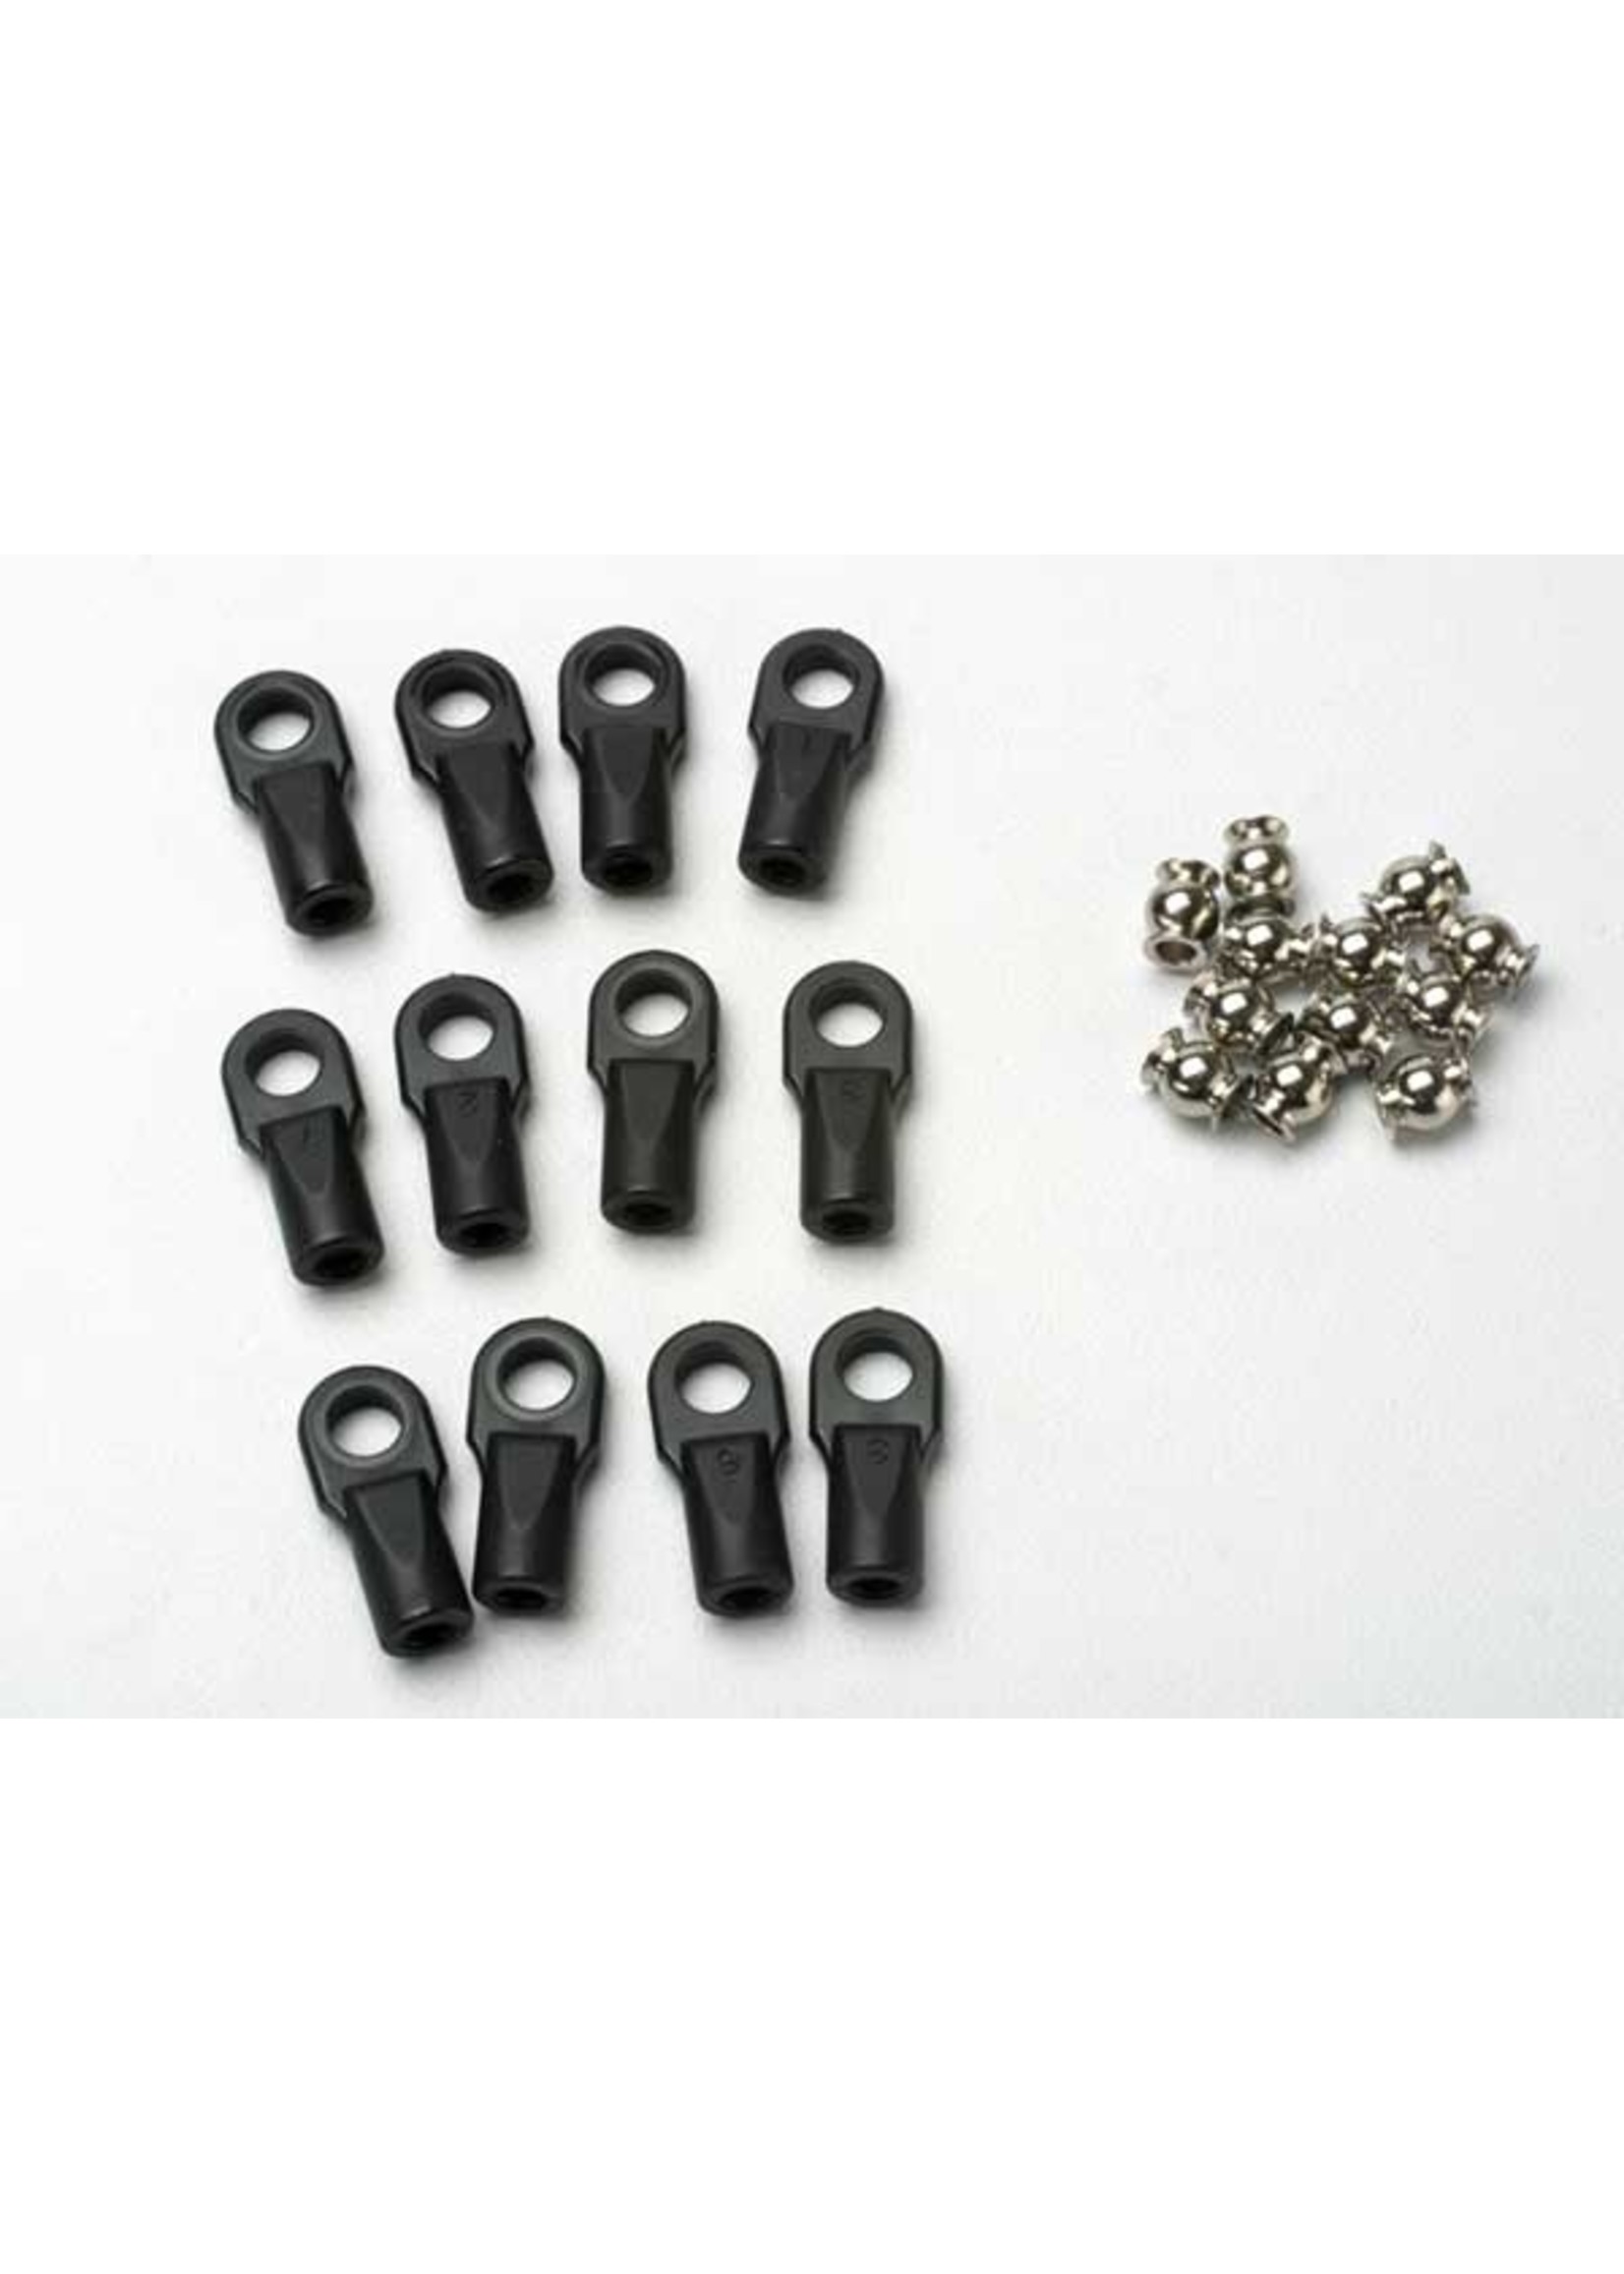 Traxxas 5347 - Large Rod Ends with Hollow Balls (12)